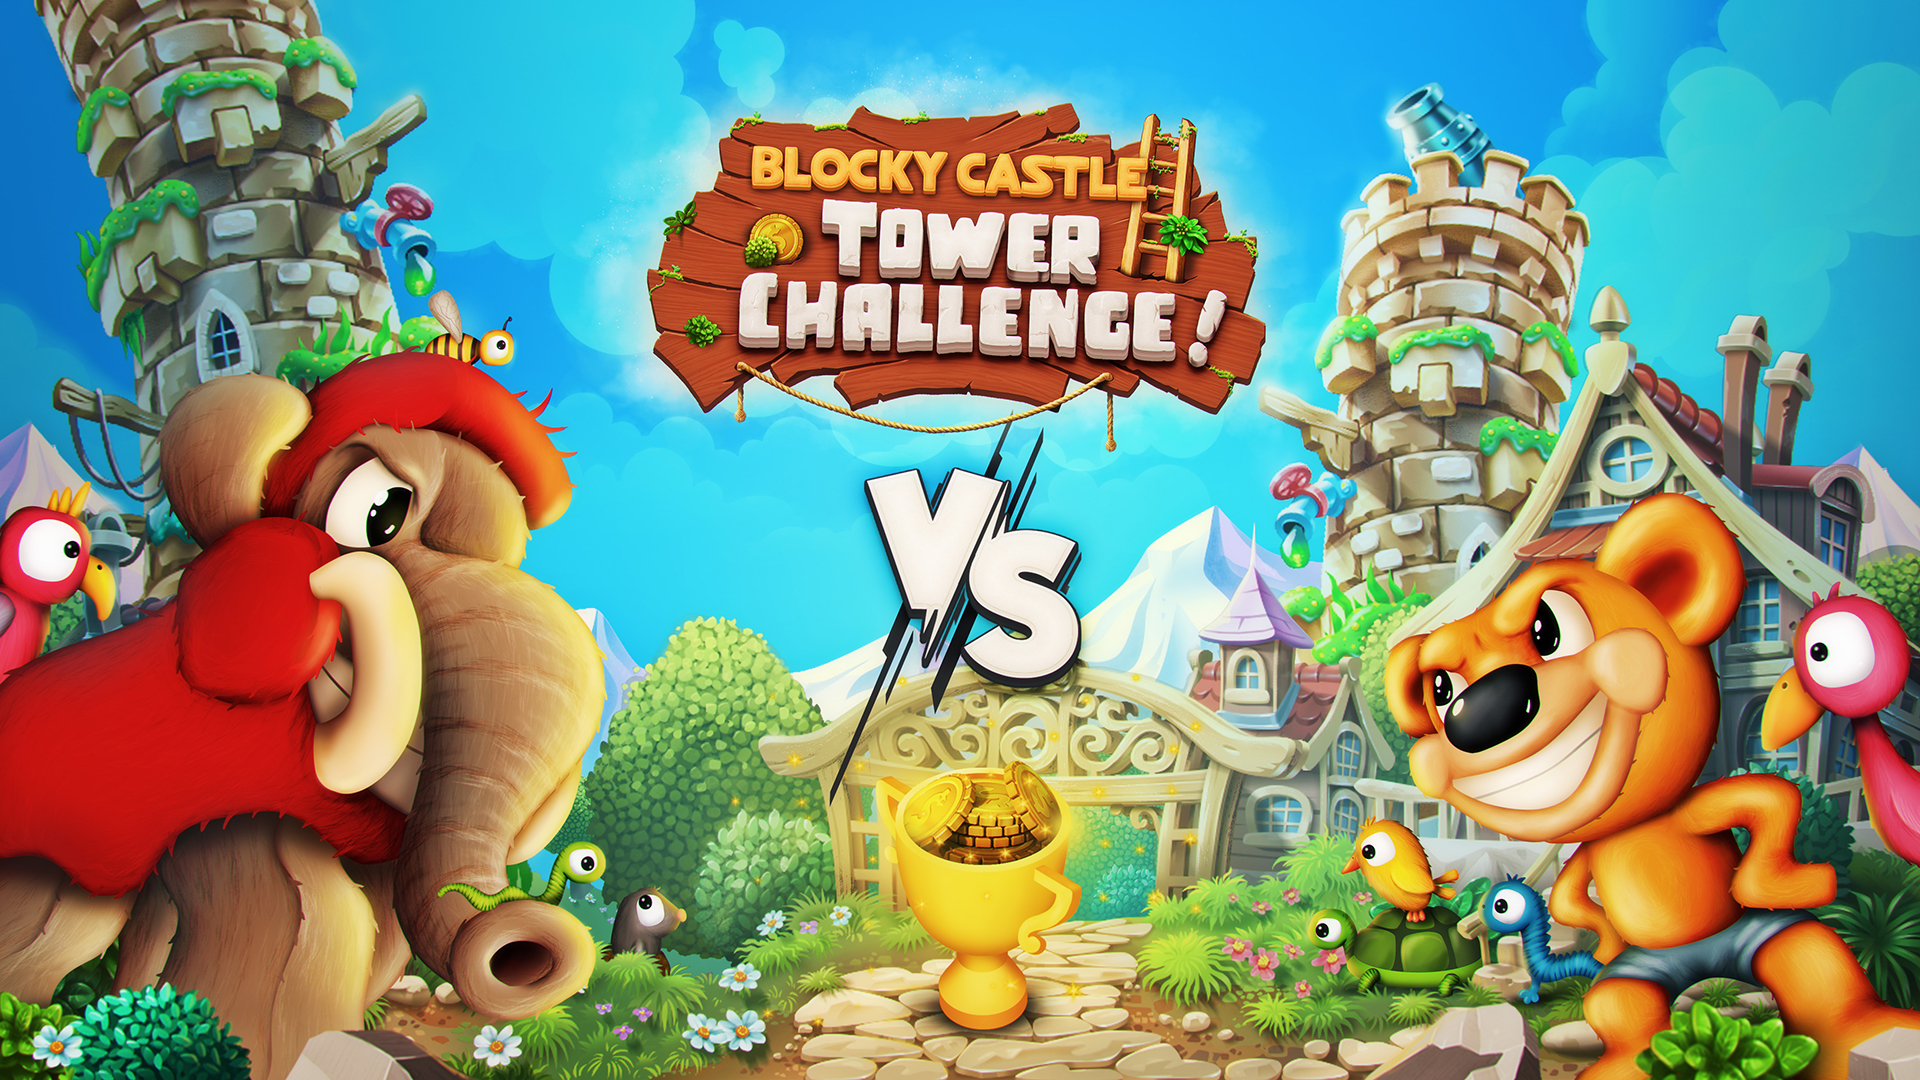 Scarica Blocky Castle: Tower Challenge gratis per Android.